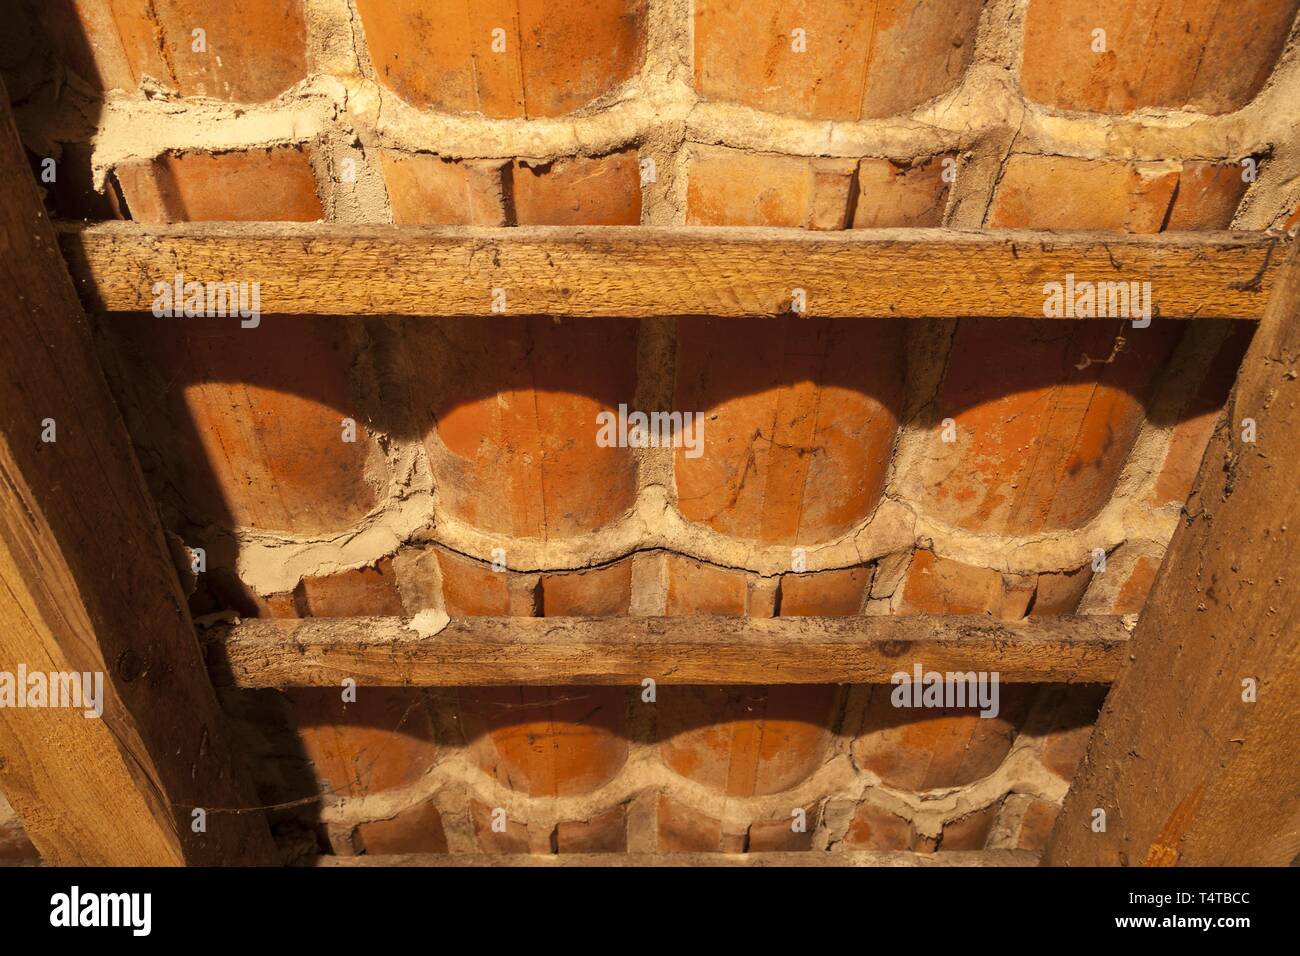 Uninsulated attic, roof construction wooden, old, Germany Stock Photo